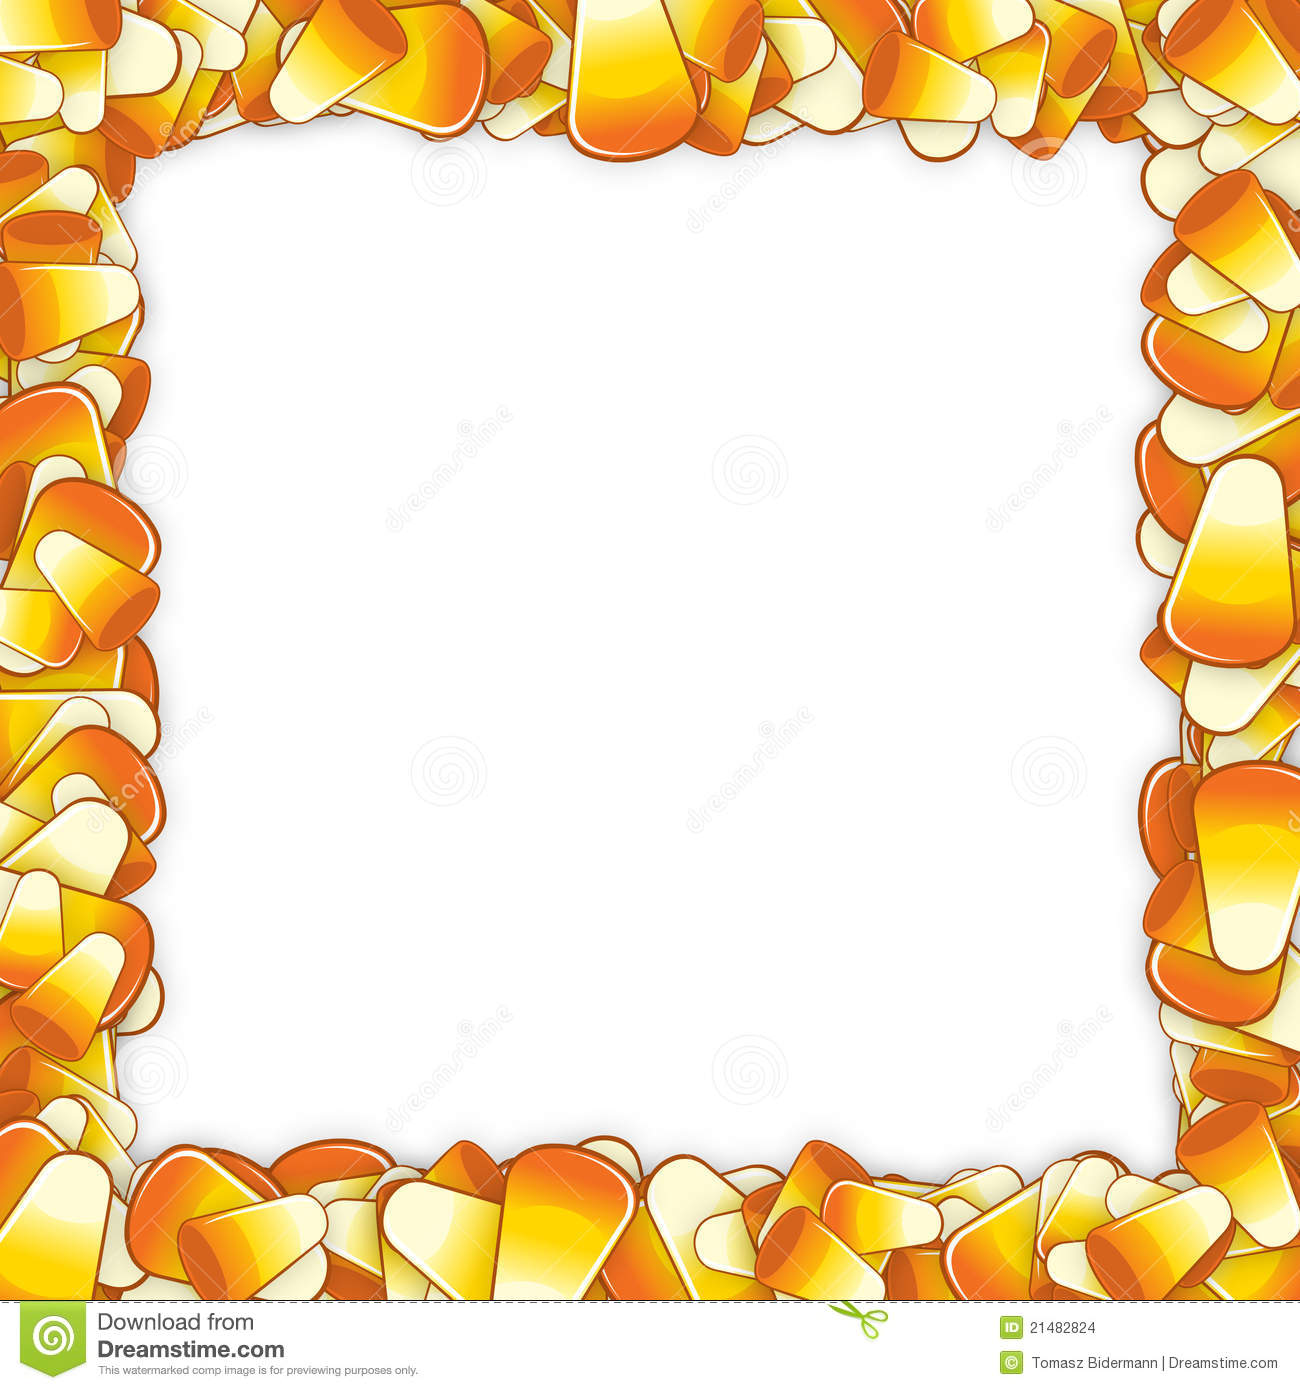 Candy PNG HD Border Transparent Candy HD Border.PNG Images.